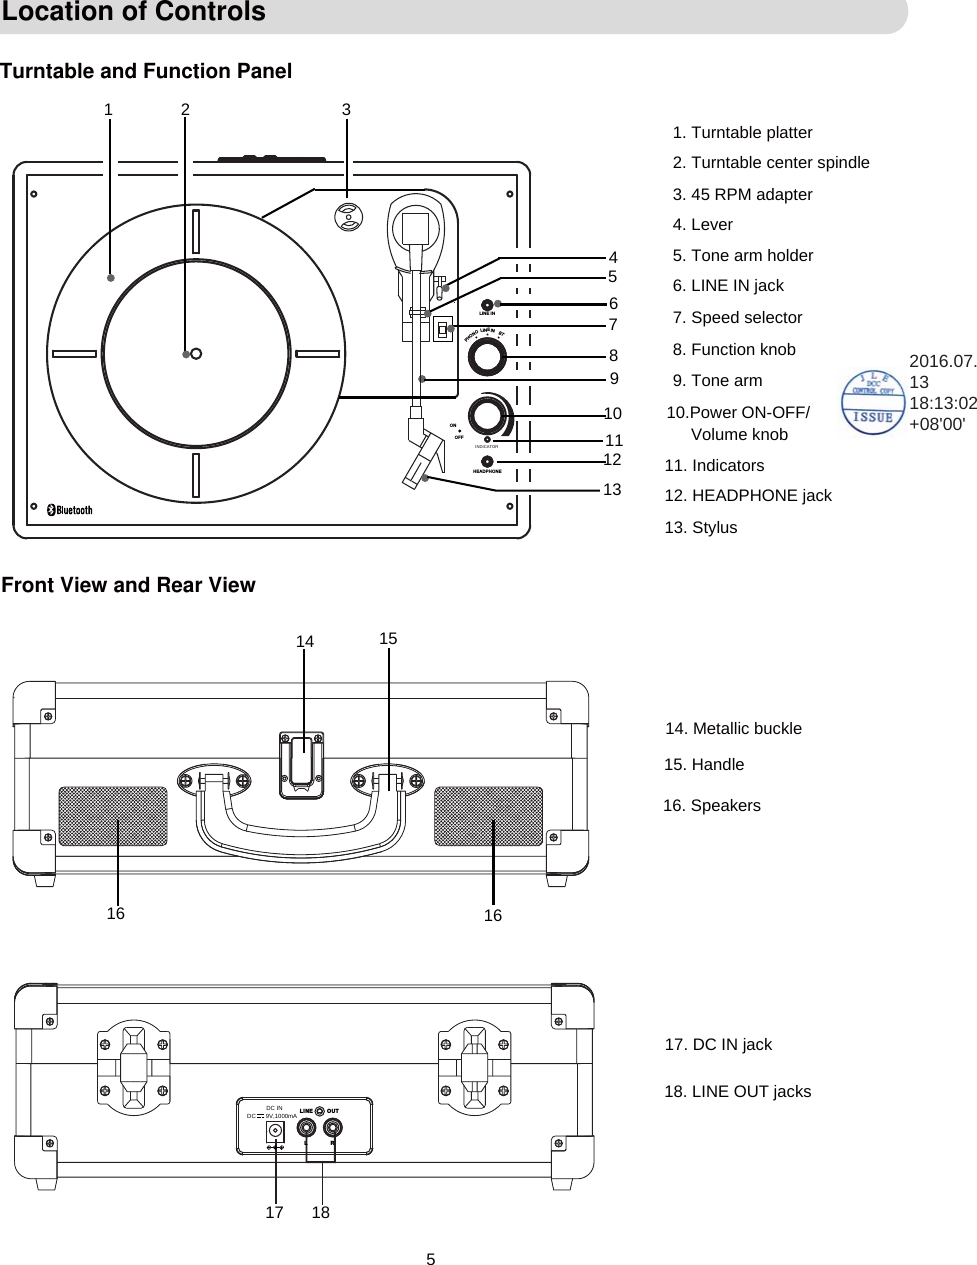 Front View and Rear ViewTurntable and Function PanelLocation of ControlsEN IINL       BO TNOHP LINE INHEADPHONEONOFF12 3456789101112131. Turntable platter2. Turntable center spindle3. 45 RPM adapter4. Lever5. Tone arm holder6. LINE IN jack7. Speed selector8. Function knob9. Tone arm11. Indicators12. HEADPHONE jack13. Stylus14 15161716LINE OUTRL1817. DC IN jack18. LINE OUT jacks14. Metallic buckle15. Handle16. Speakers10.Power ON-OFF/Volume knob5INDICATORDC INDC      9V,1000mA2016.07.1318:13:02+08&apos;00&apos;